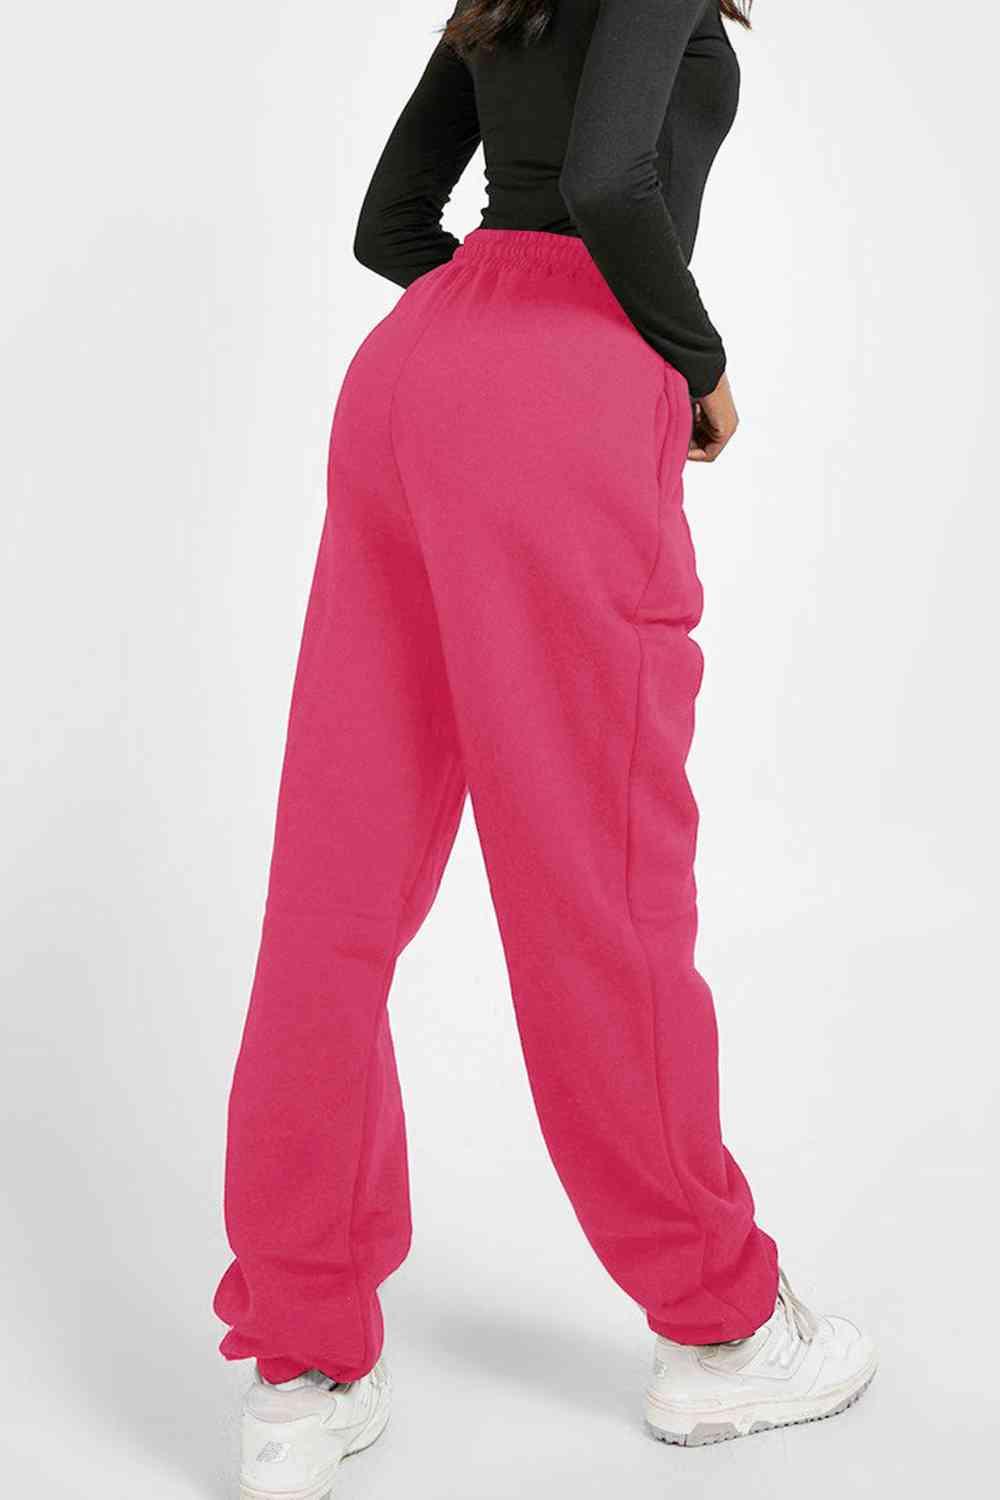 Simply Love Simply Love Full Size CA 1850 Graphic Joggers - Immenzive